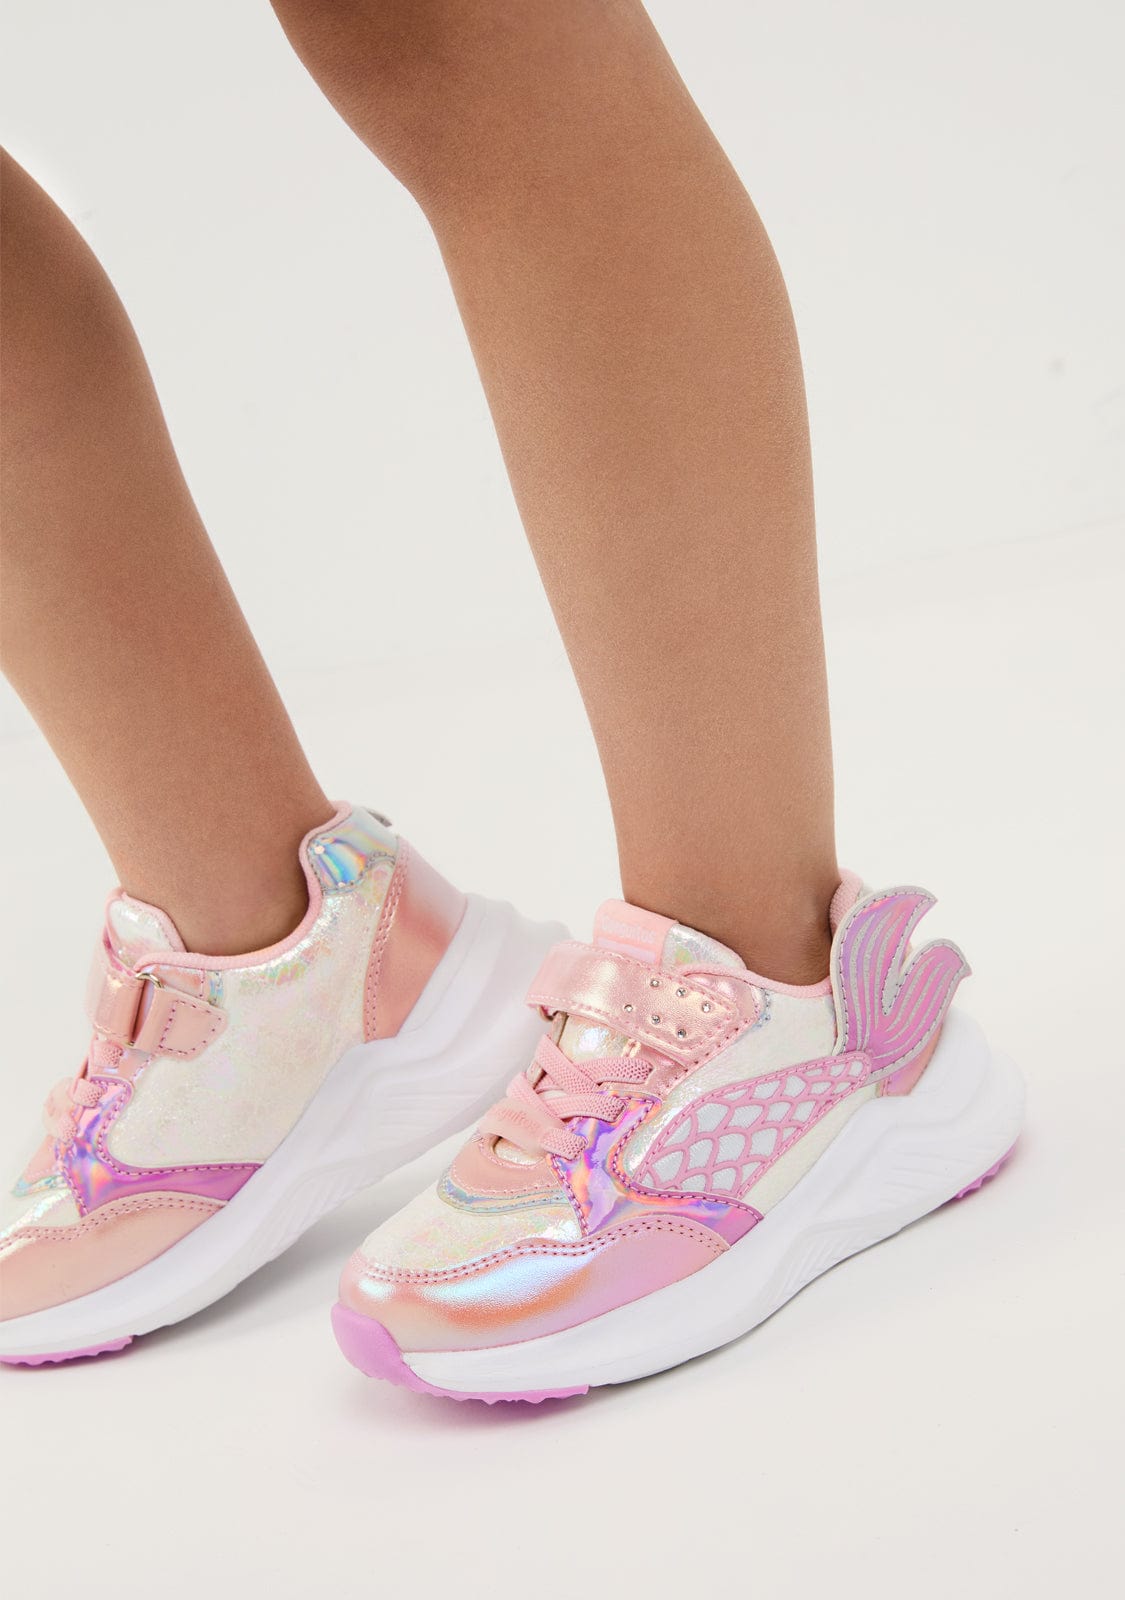 CONGUITOS Shoes Pink Mermaid Elastic With Light Sneakers